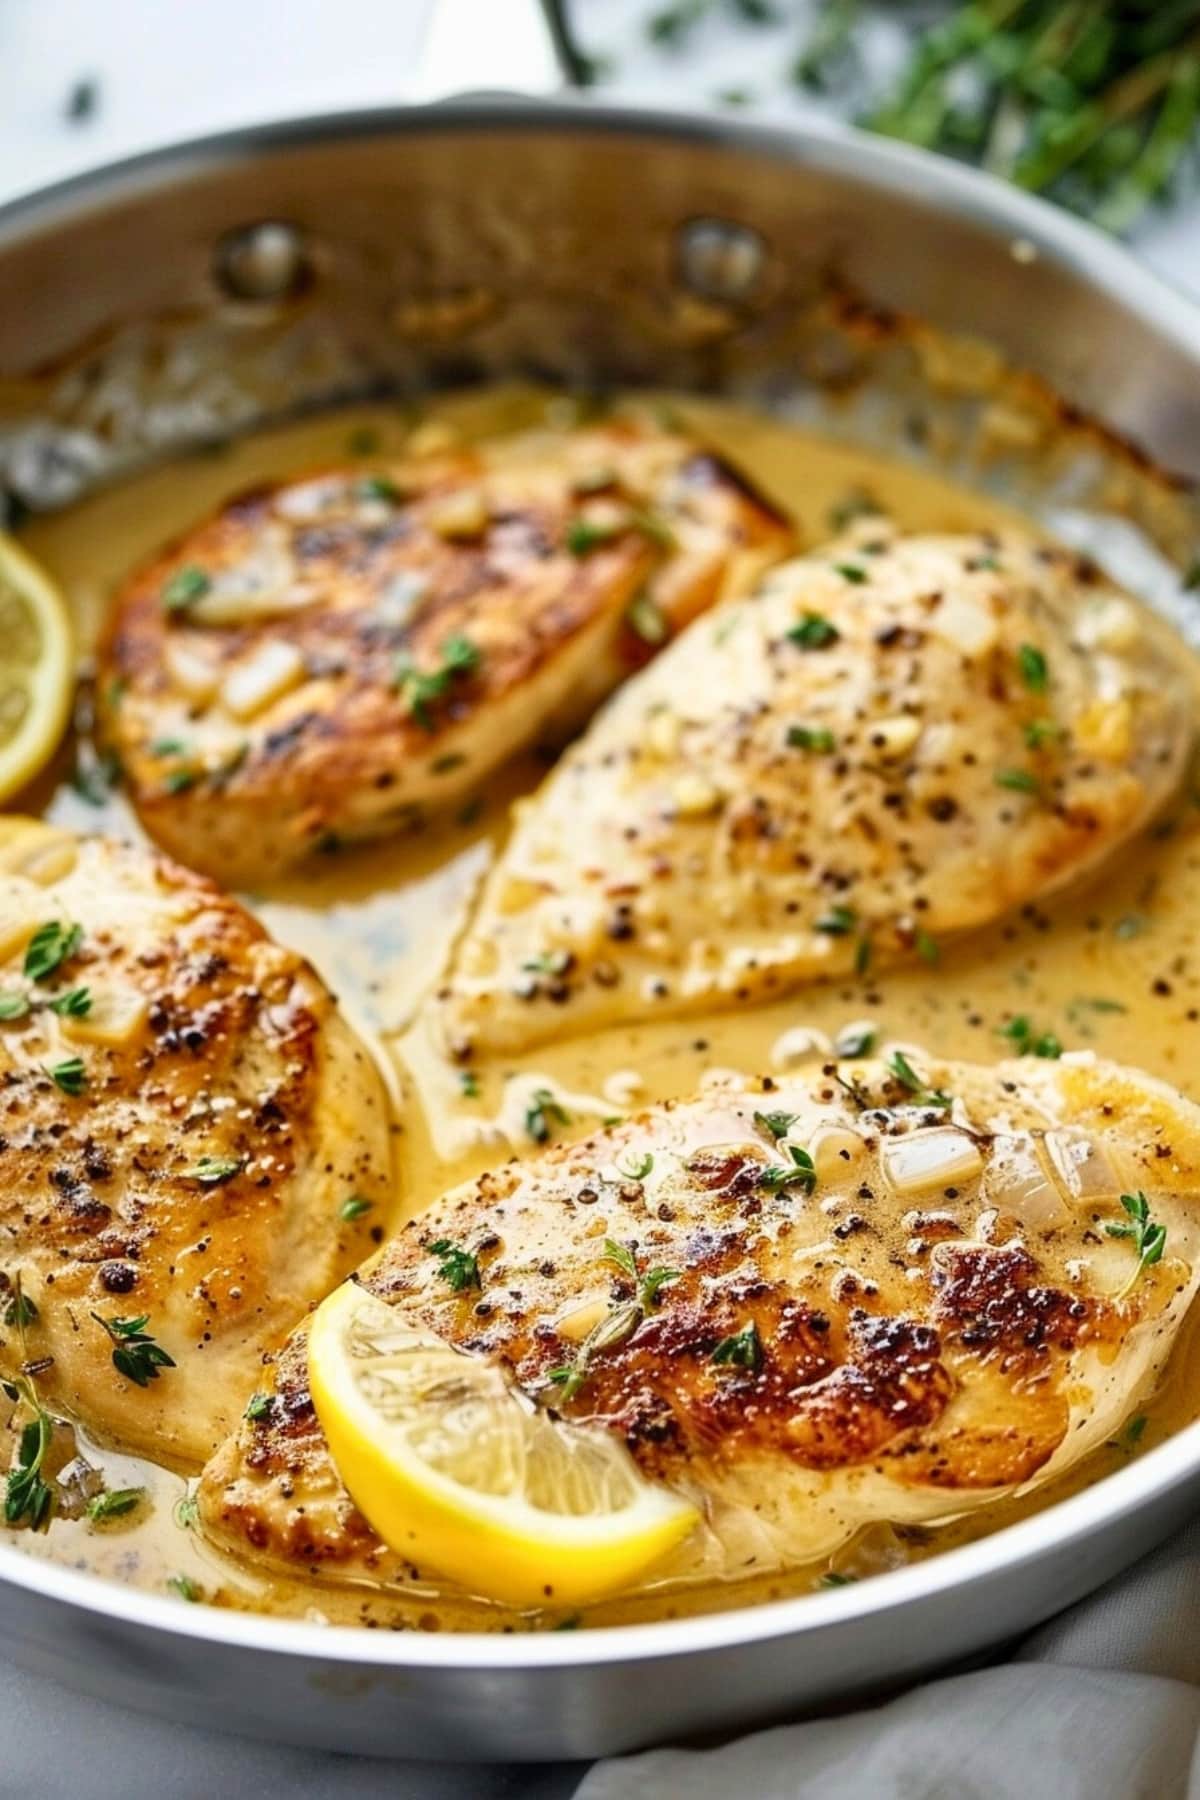 Chicken breast cooked with lemon garlic sauce in a stainless pan.